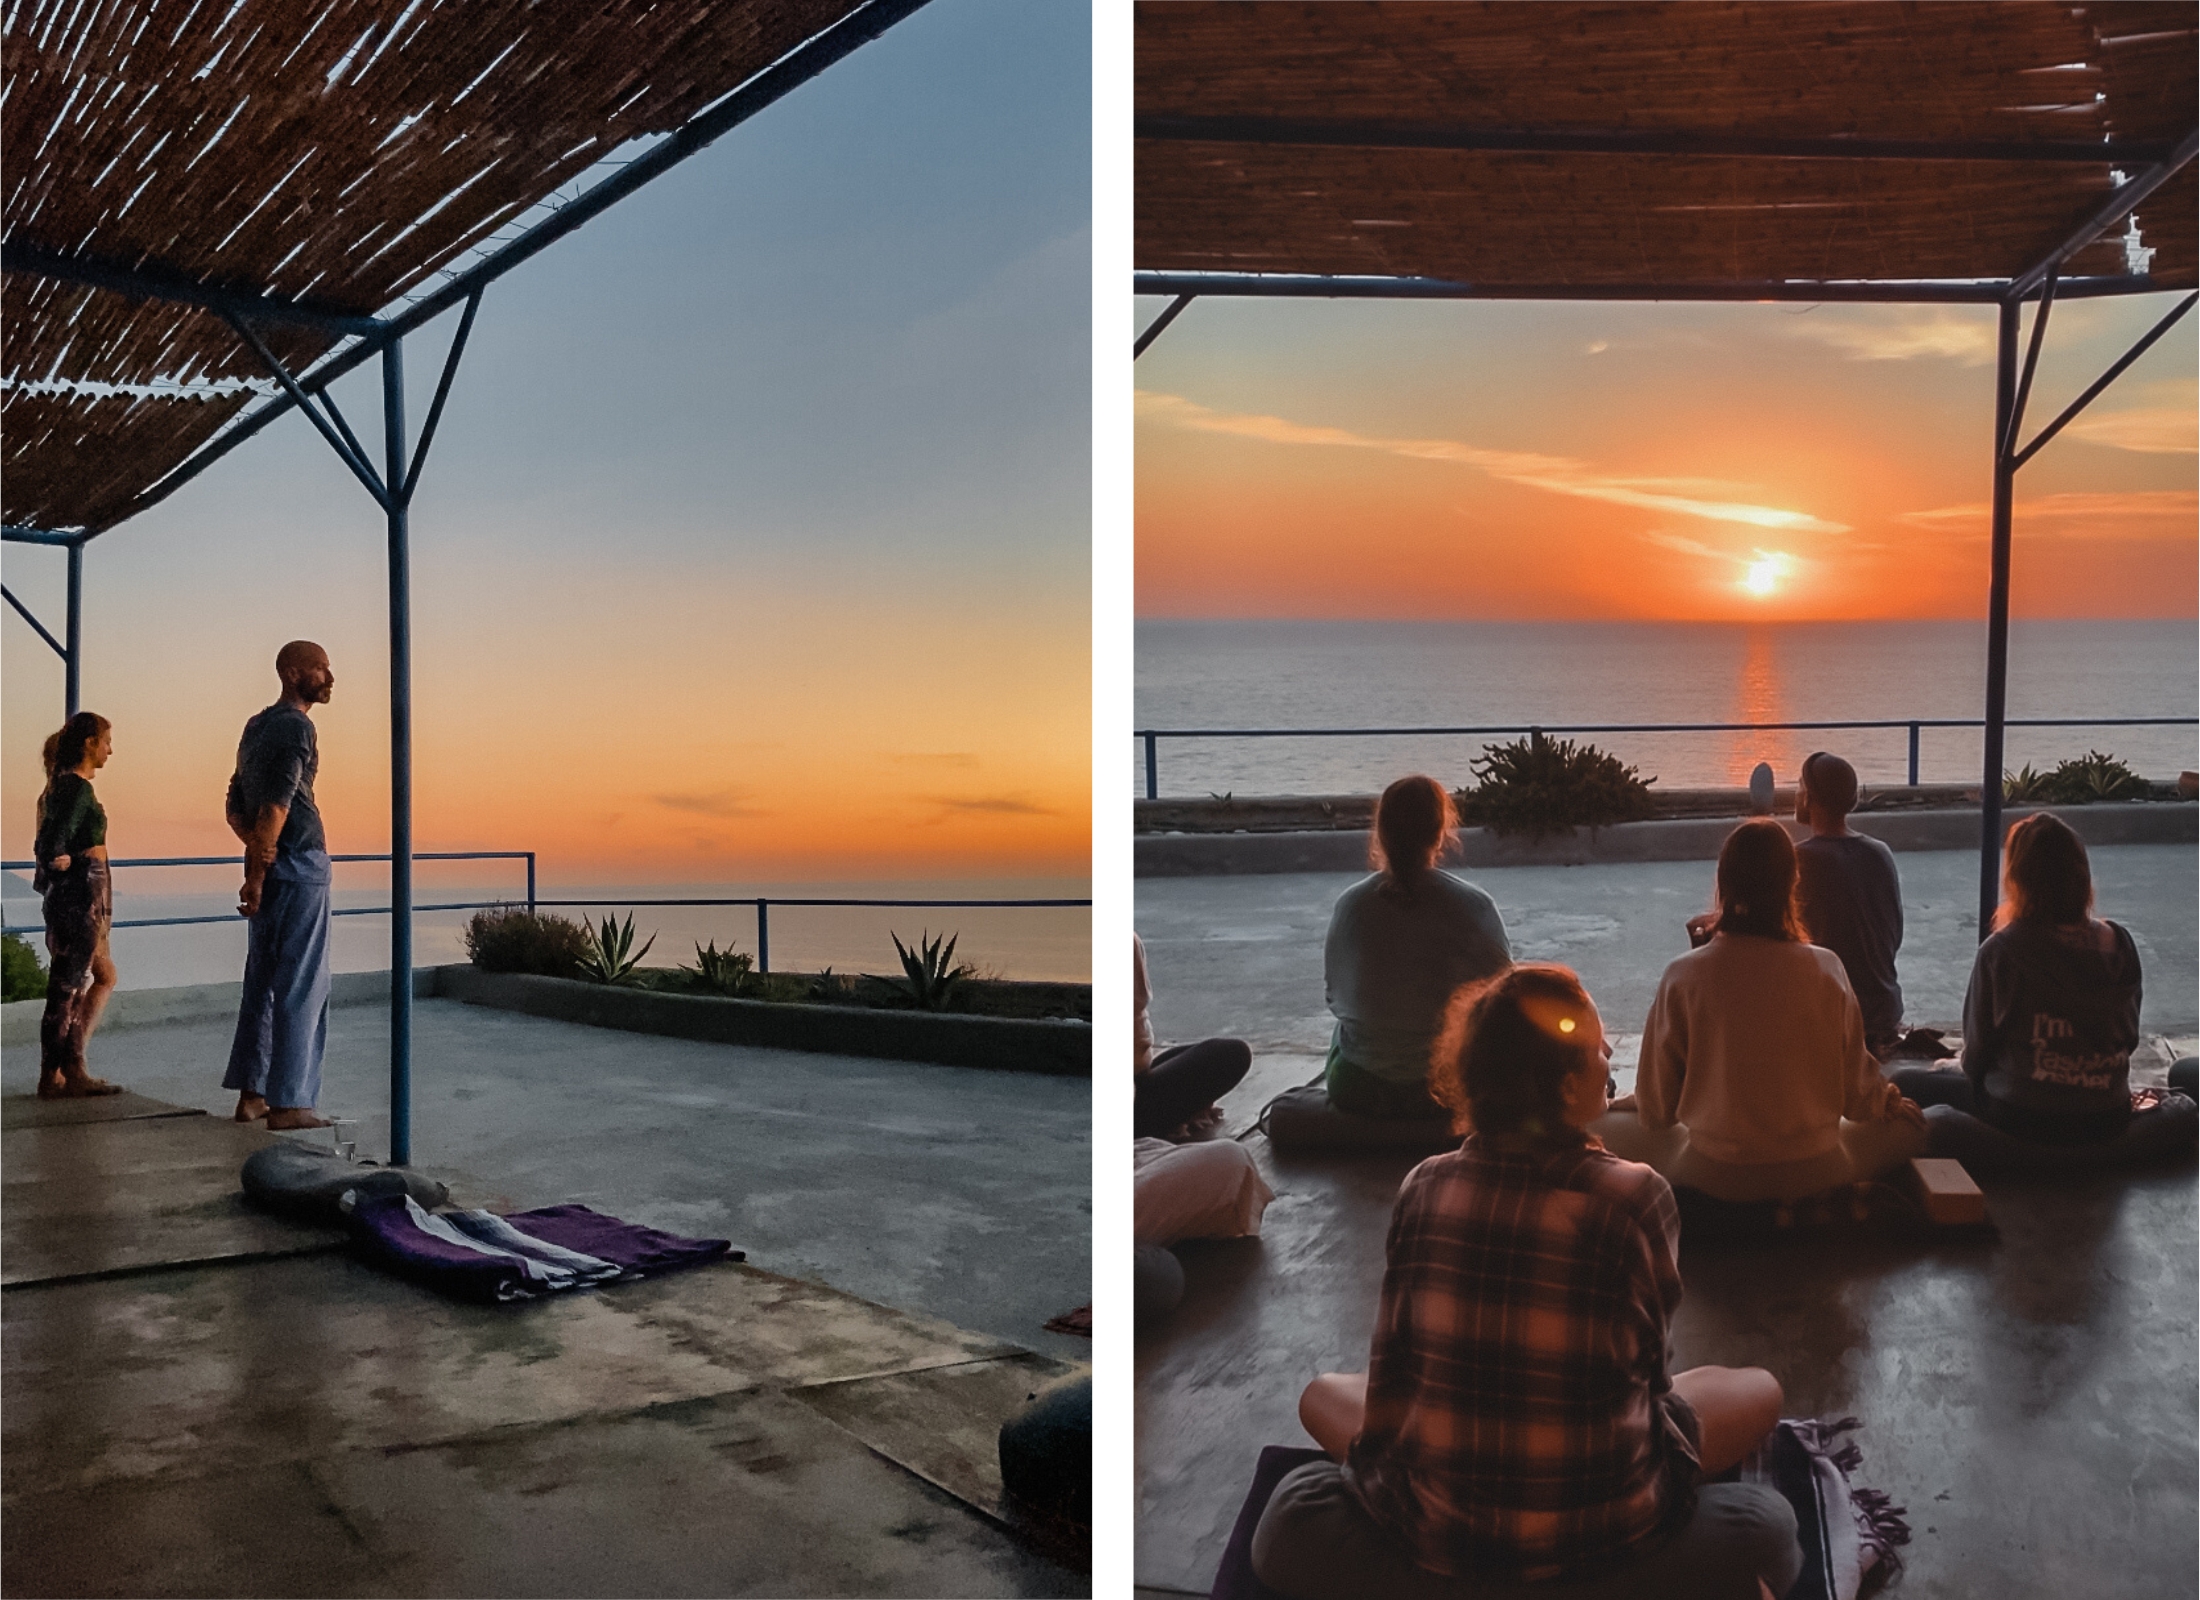 A group of yoga students meditate together overlooking the Mediterranean Sea and the sunset.